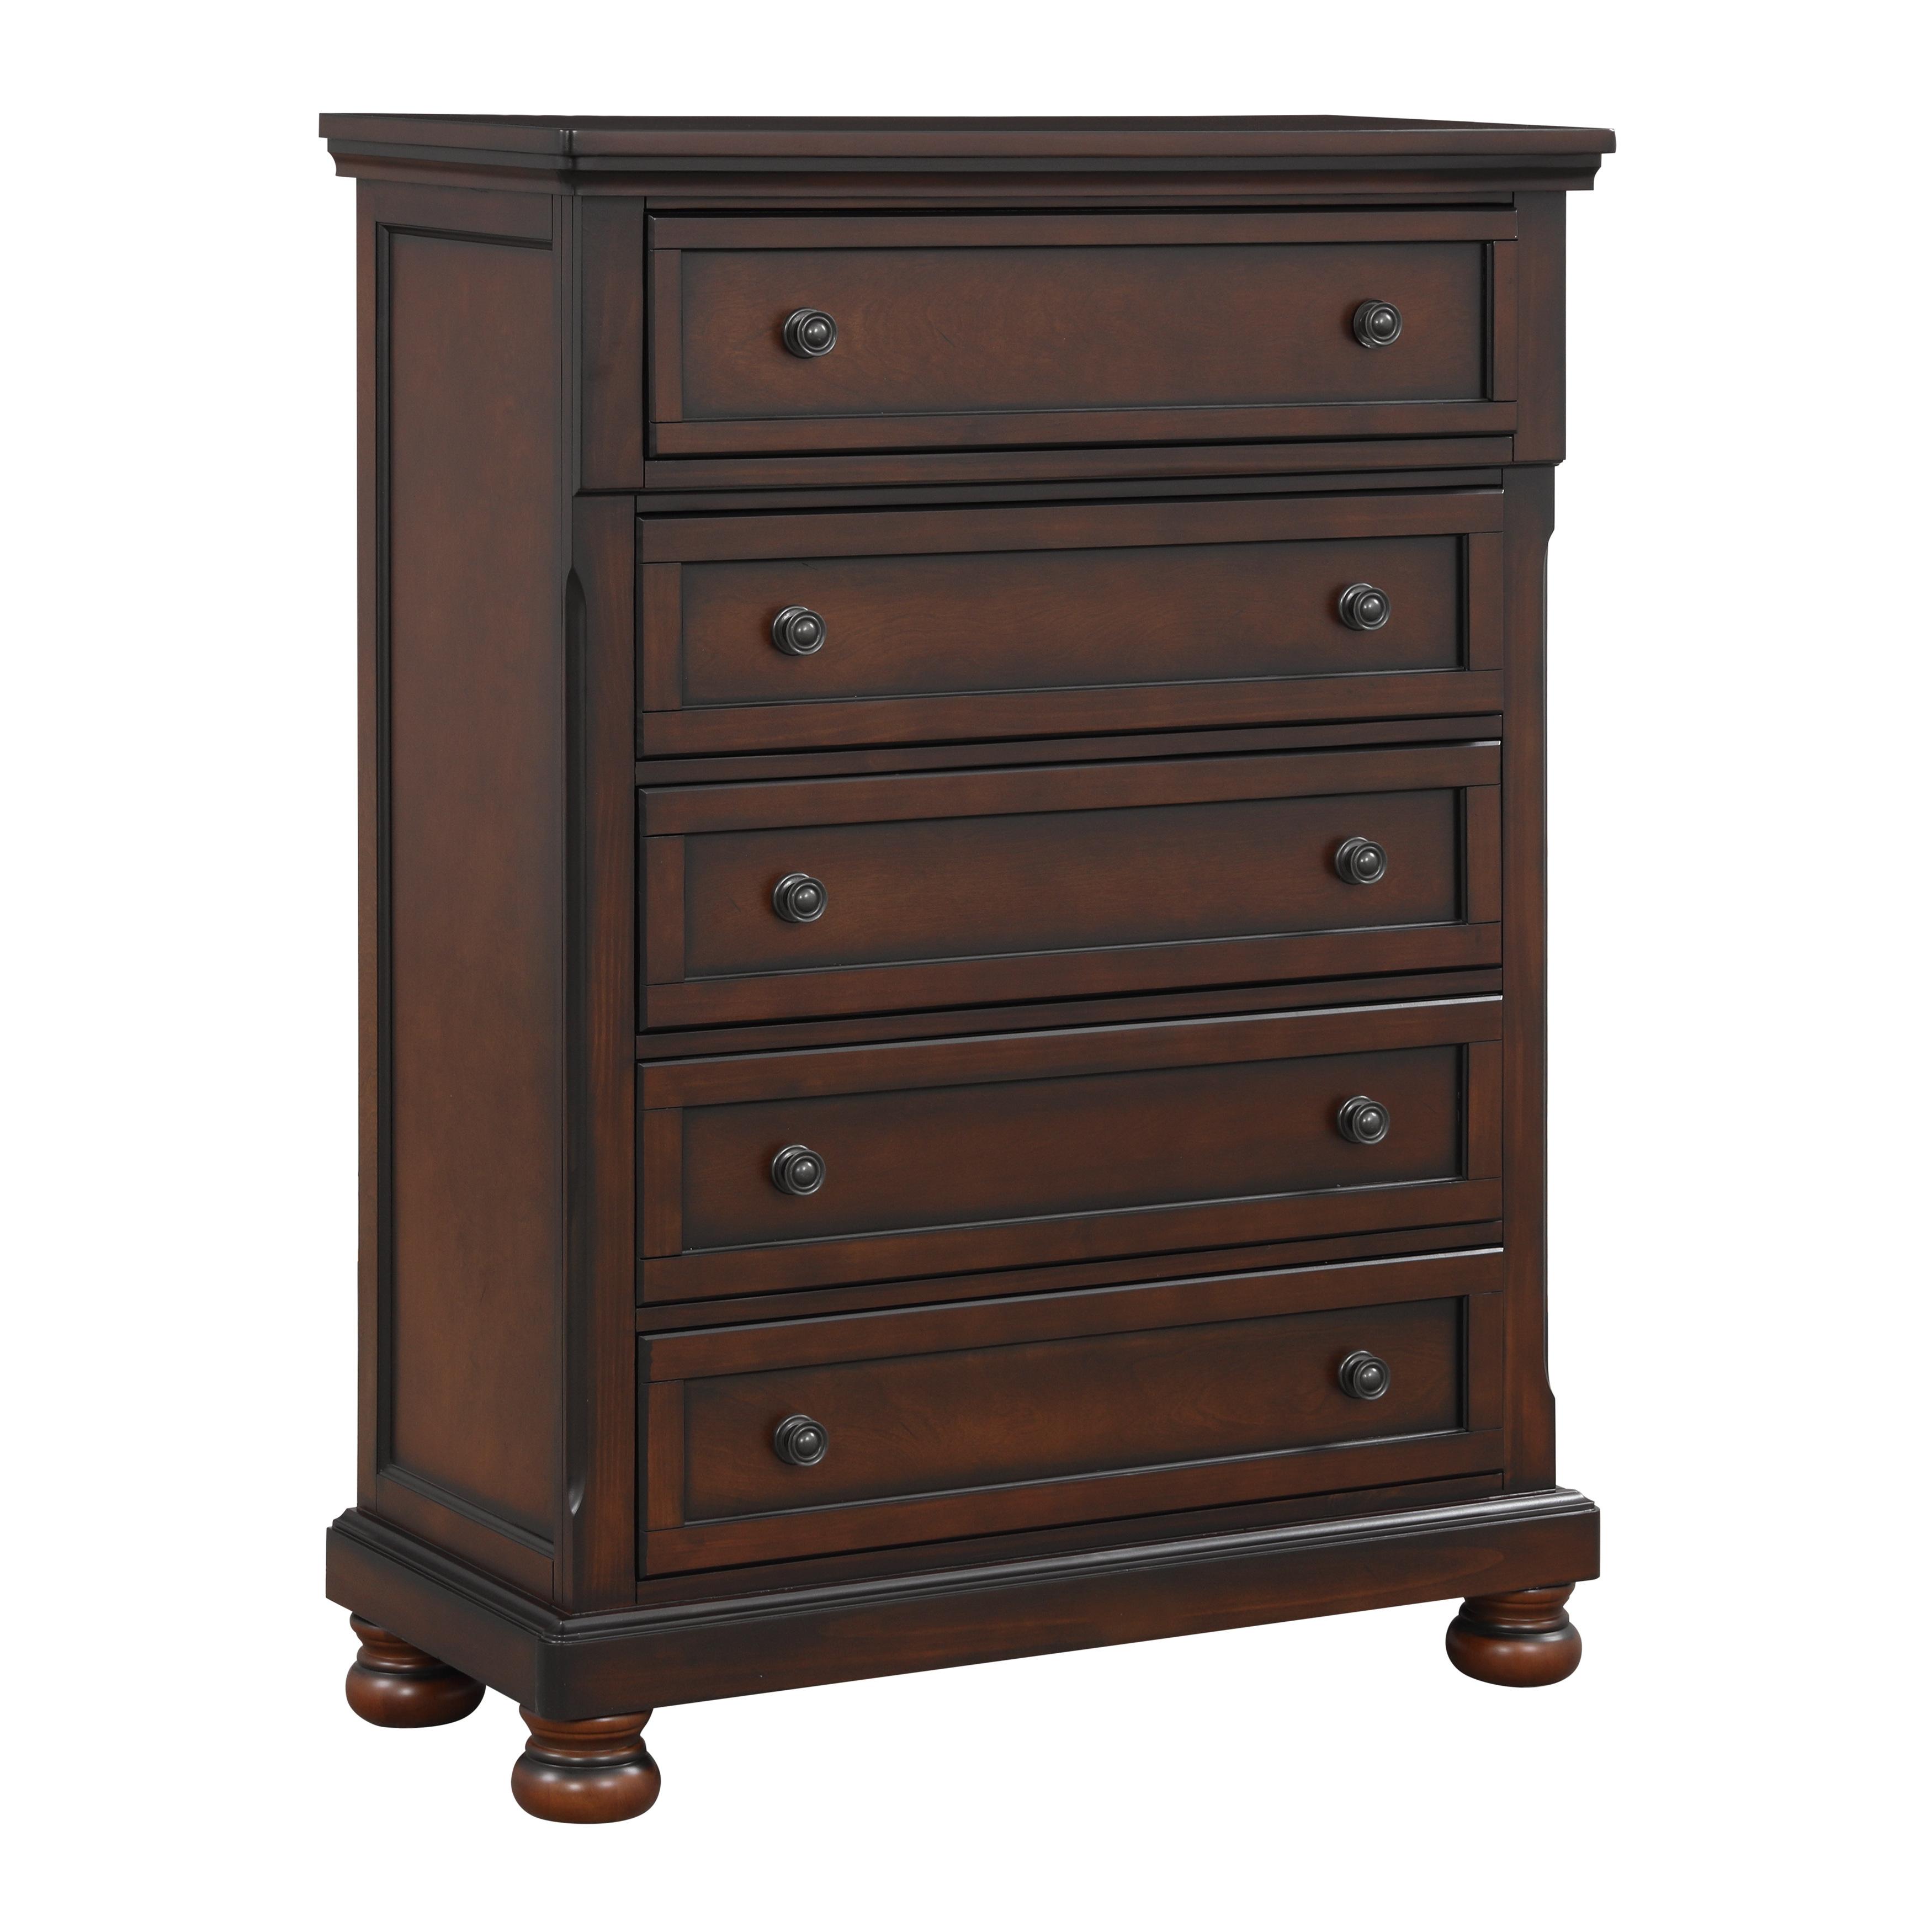 Traditional Chest 2159-9 Cumberland 2159-9 in Cherry 